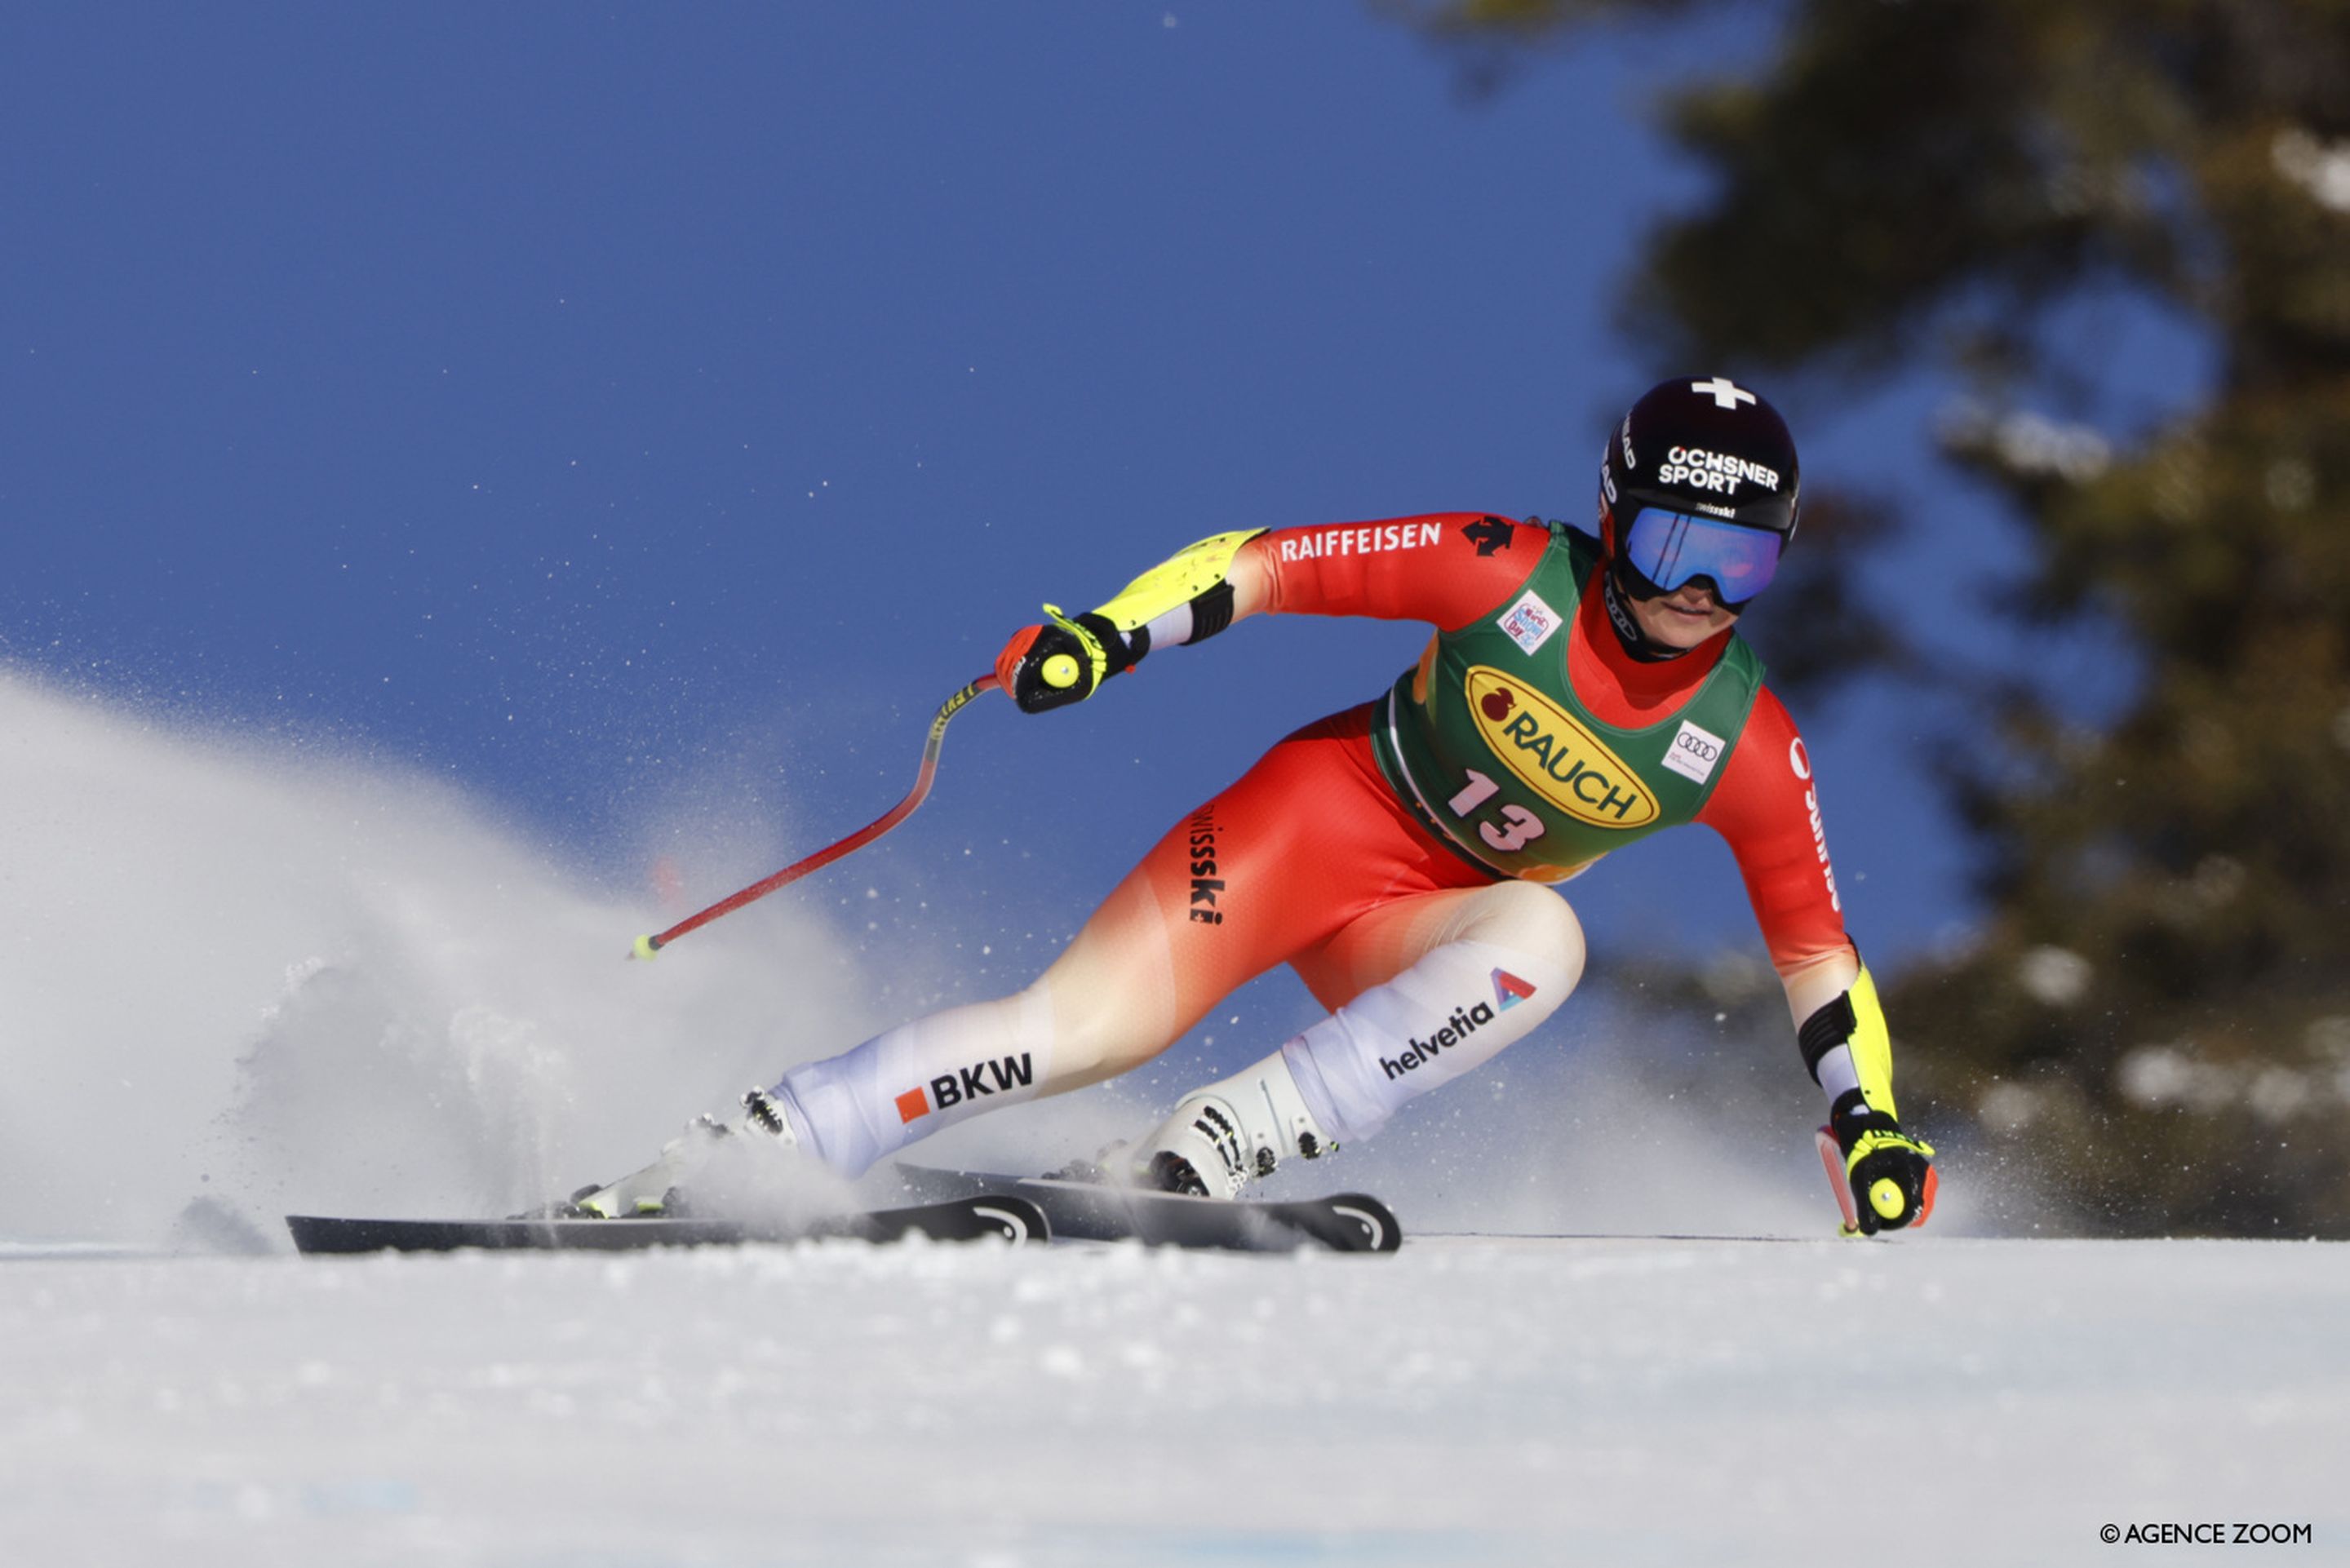 Corinne Suter (SUI) slides down the super-G slope with speed on the way to a win (Agence Zoom)